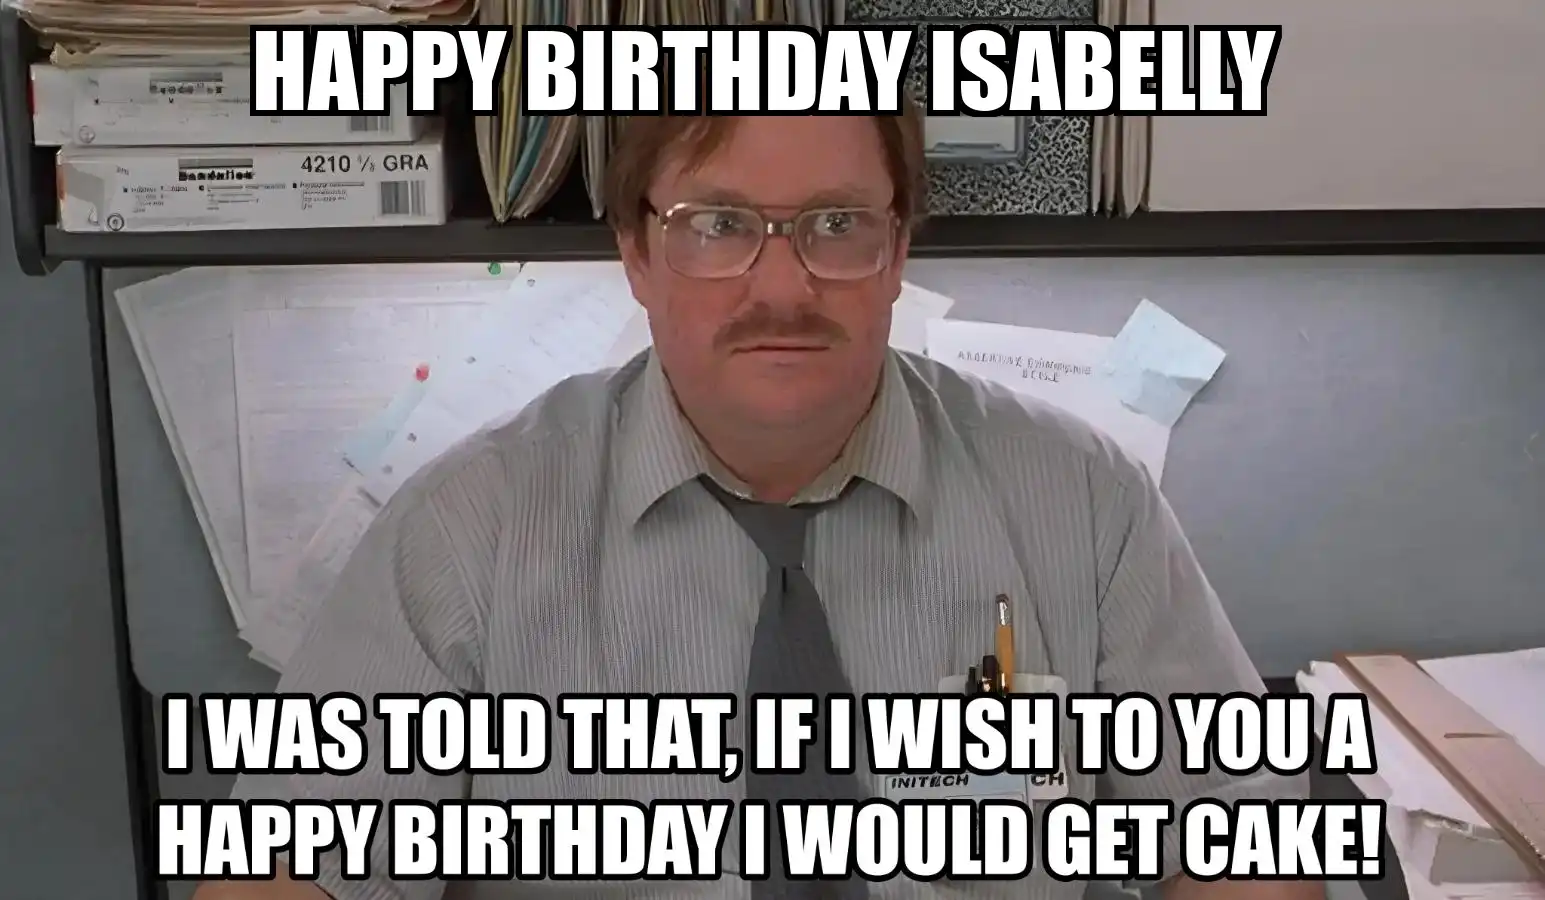 Happy Birthday Isabelly I Would Get A Cake Meme